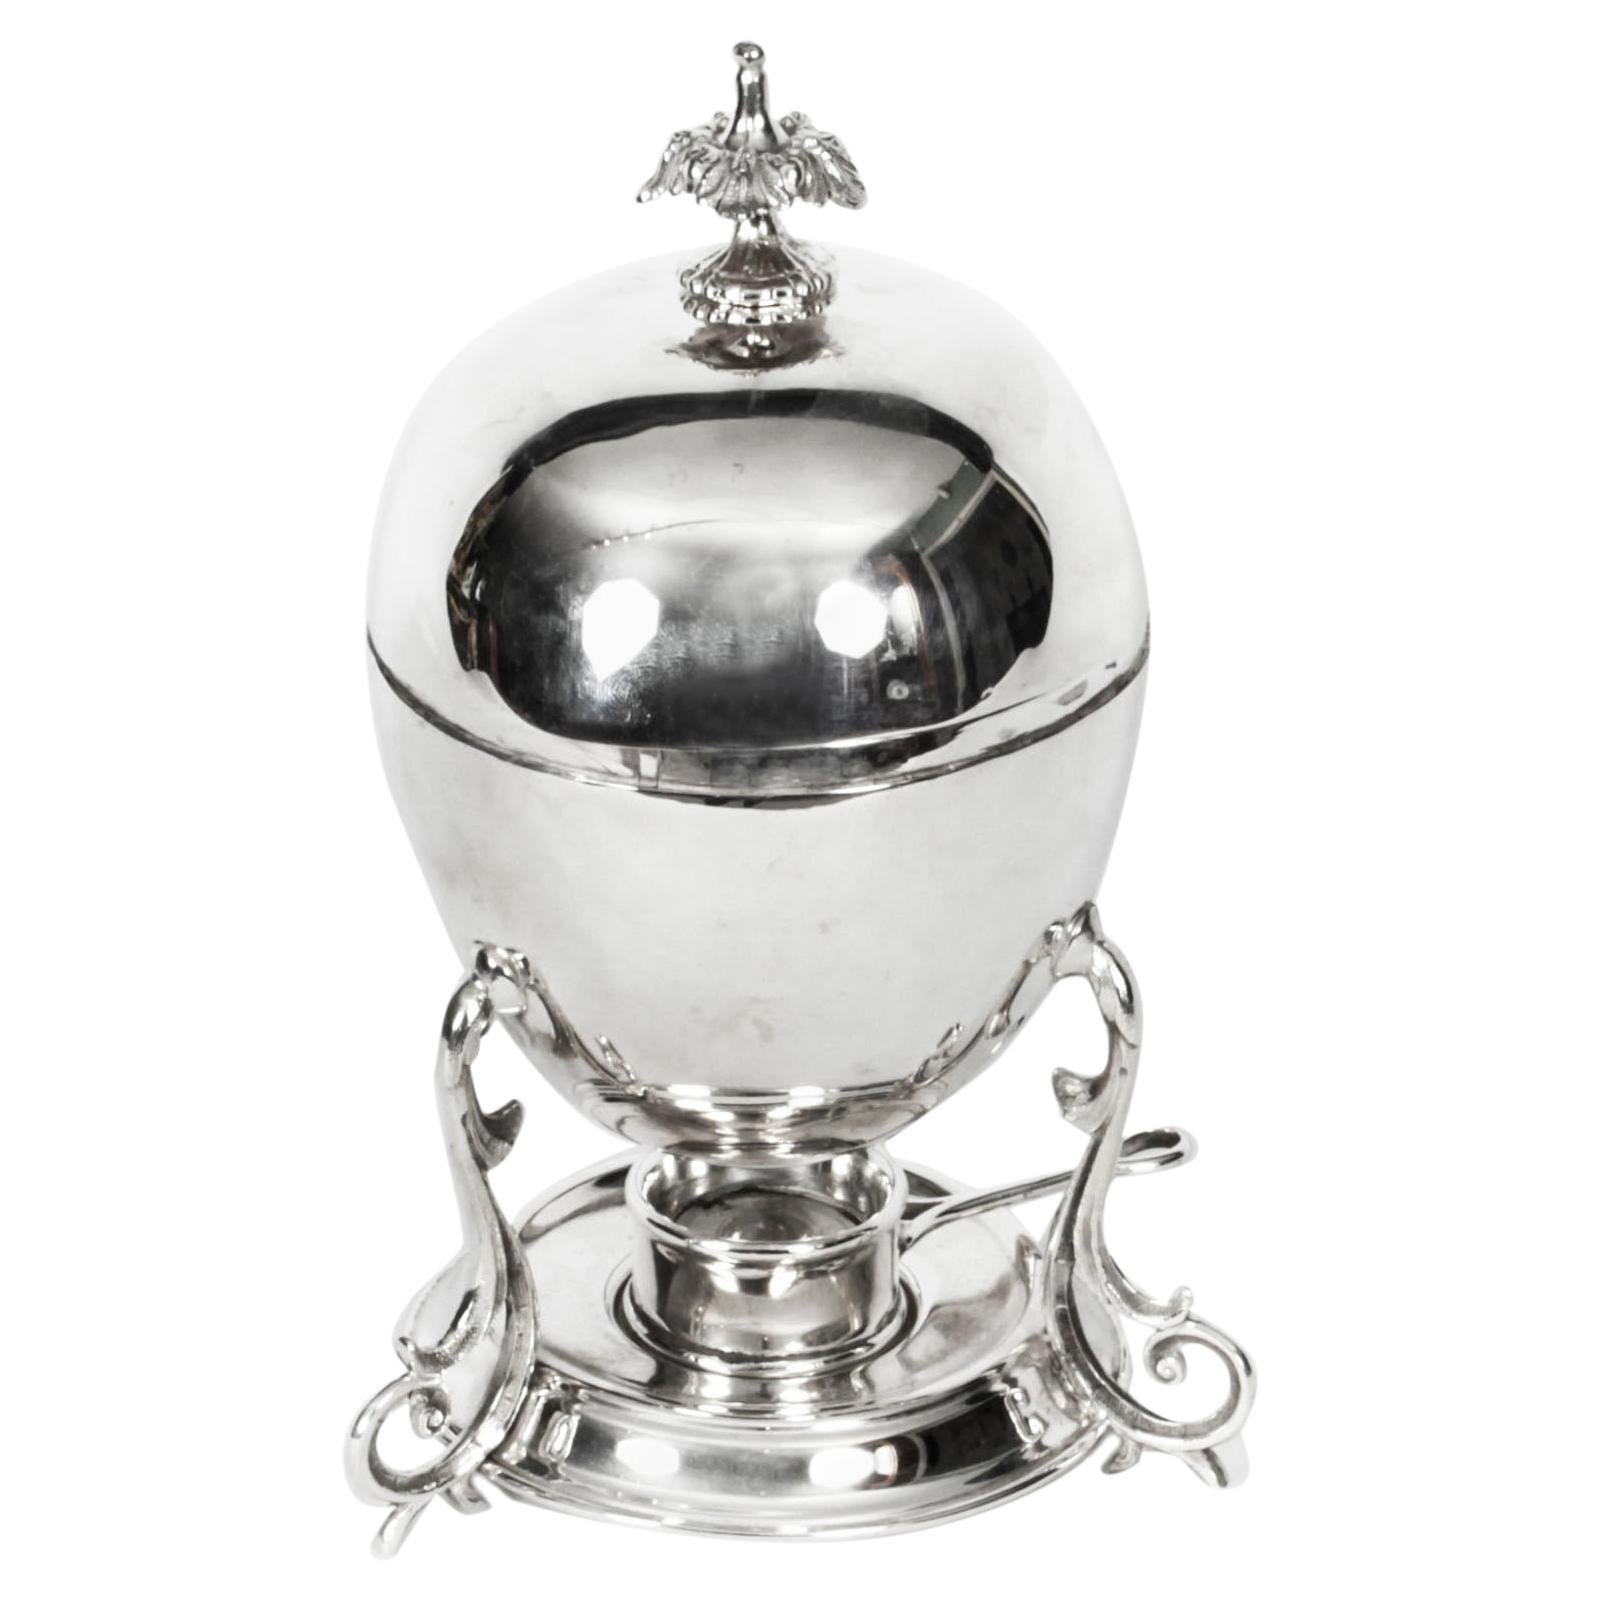 Antique Victorian Silver Plated Egg Boiler, 19th Century